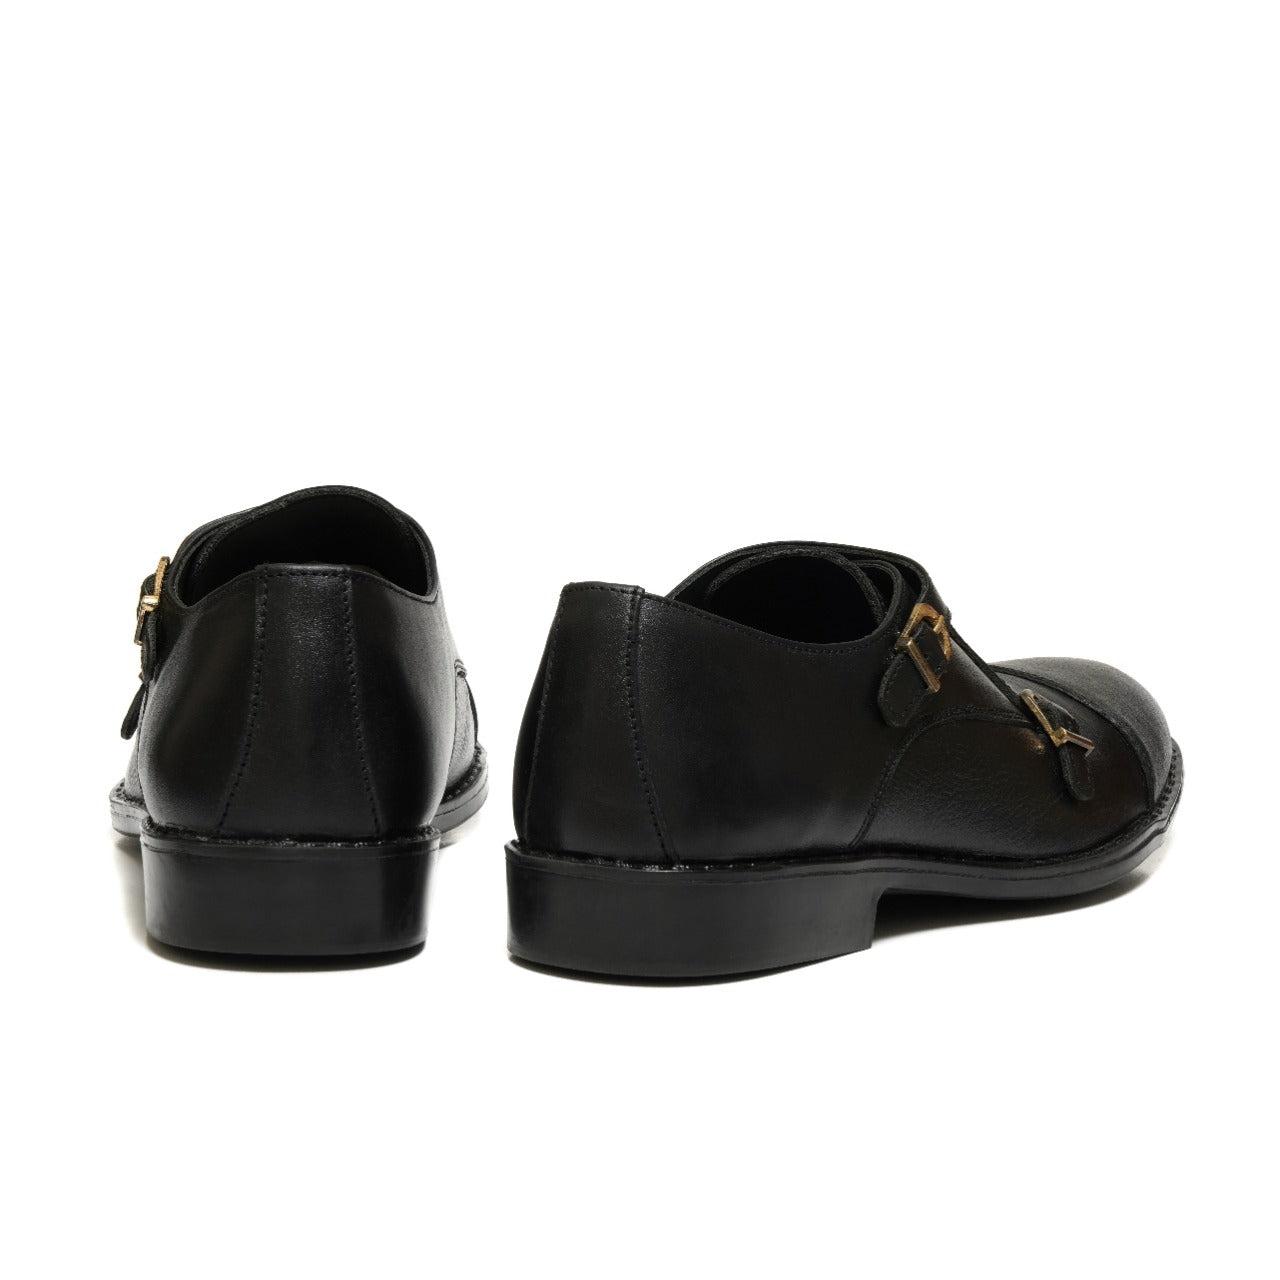 SKU:2011-Black Rubber Sole Cow Leather Formal Double Monk Style